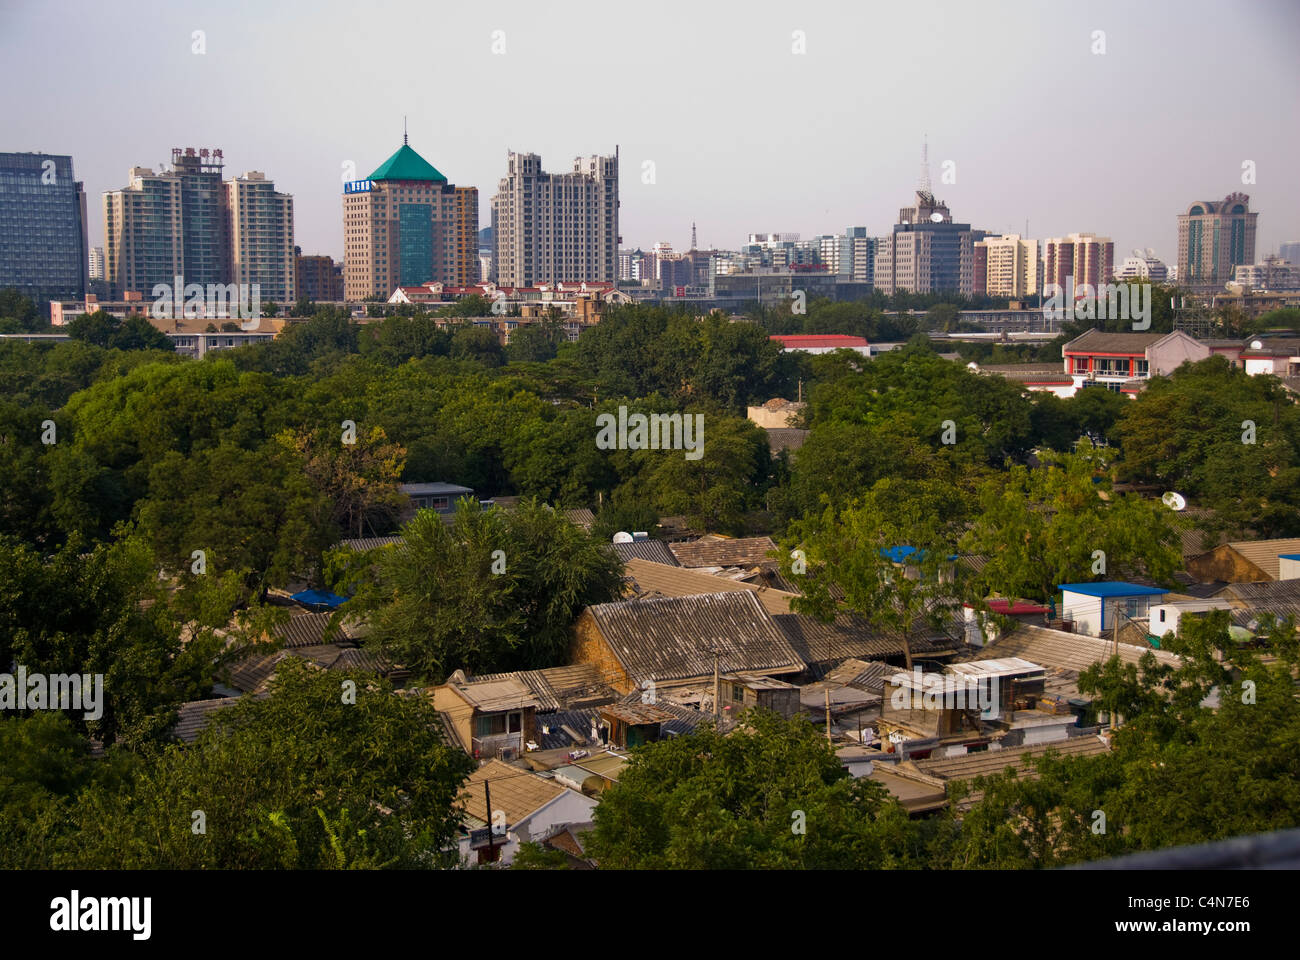 Beijing, China, Overview from Bell Tower, Old Hutong Neighborhood Contrast with New Architecture Stock Photo